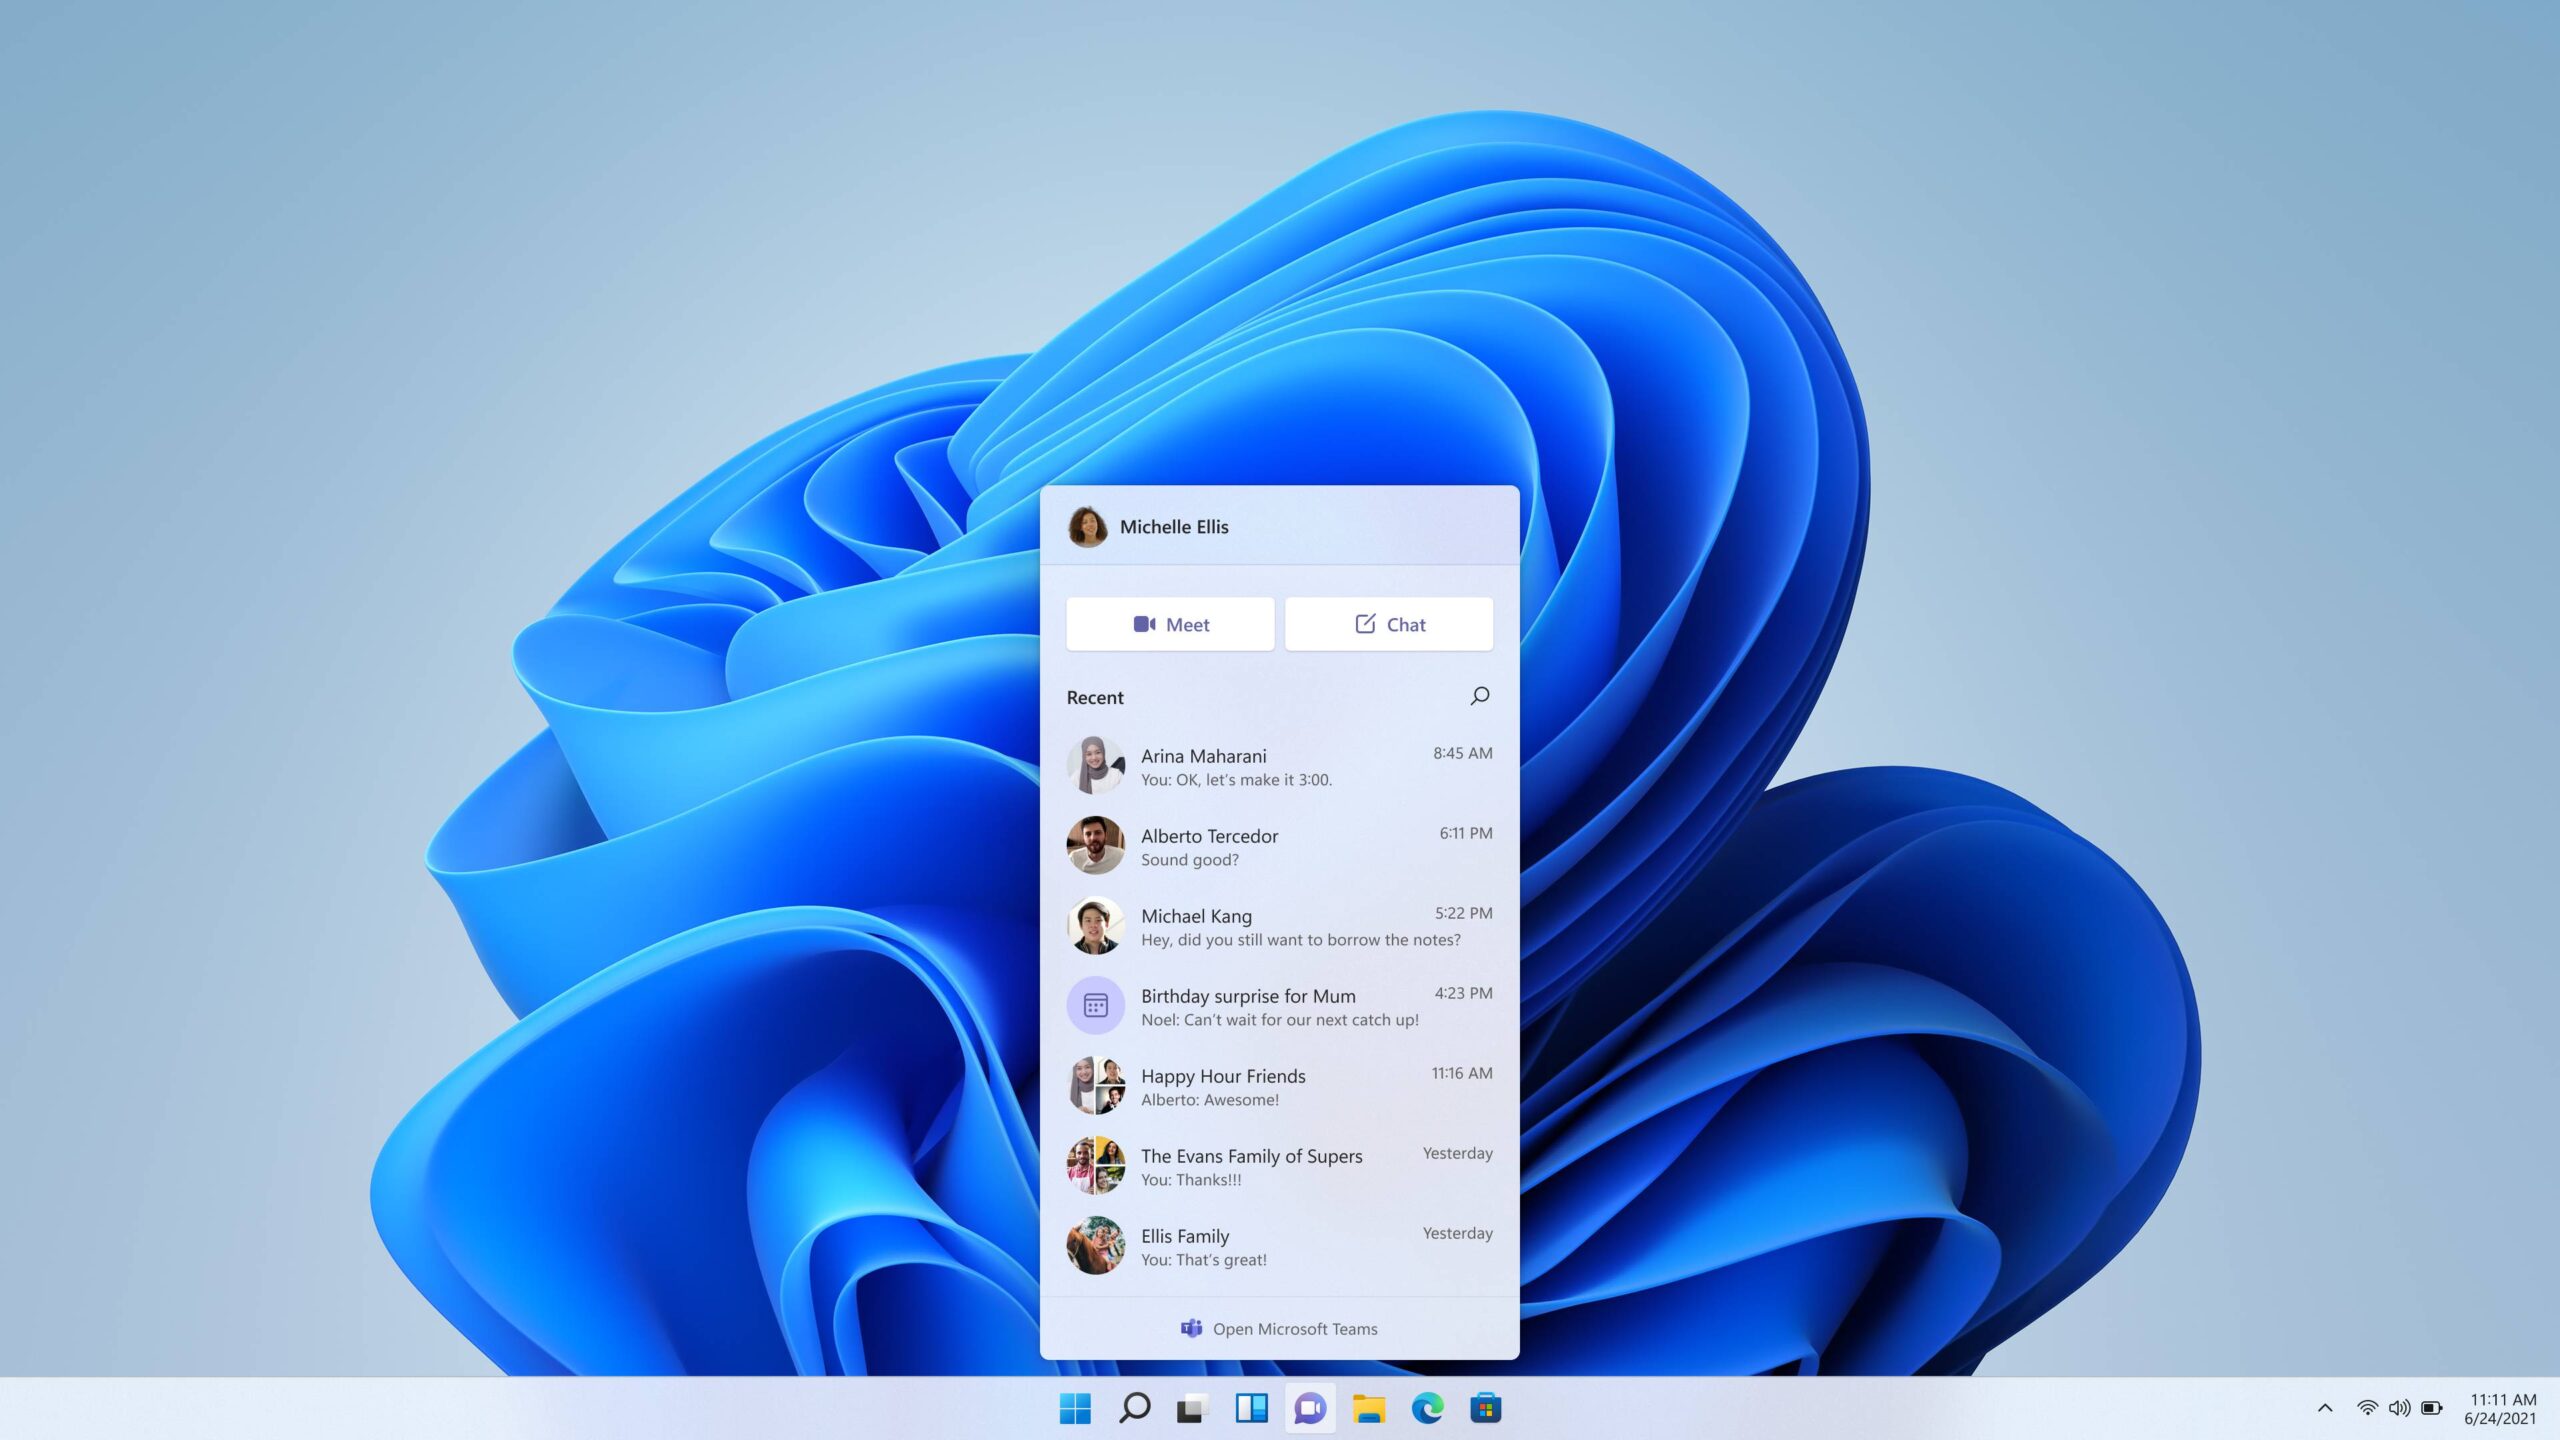 With Windows 11 You Can Now share Your Screen In Microsoft Teams And Other Video Calls